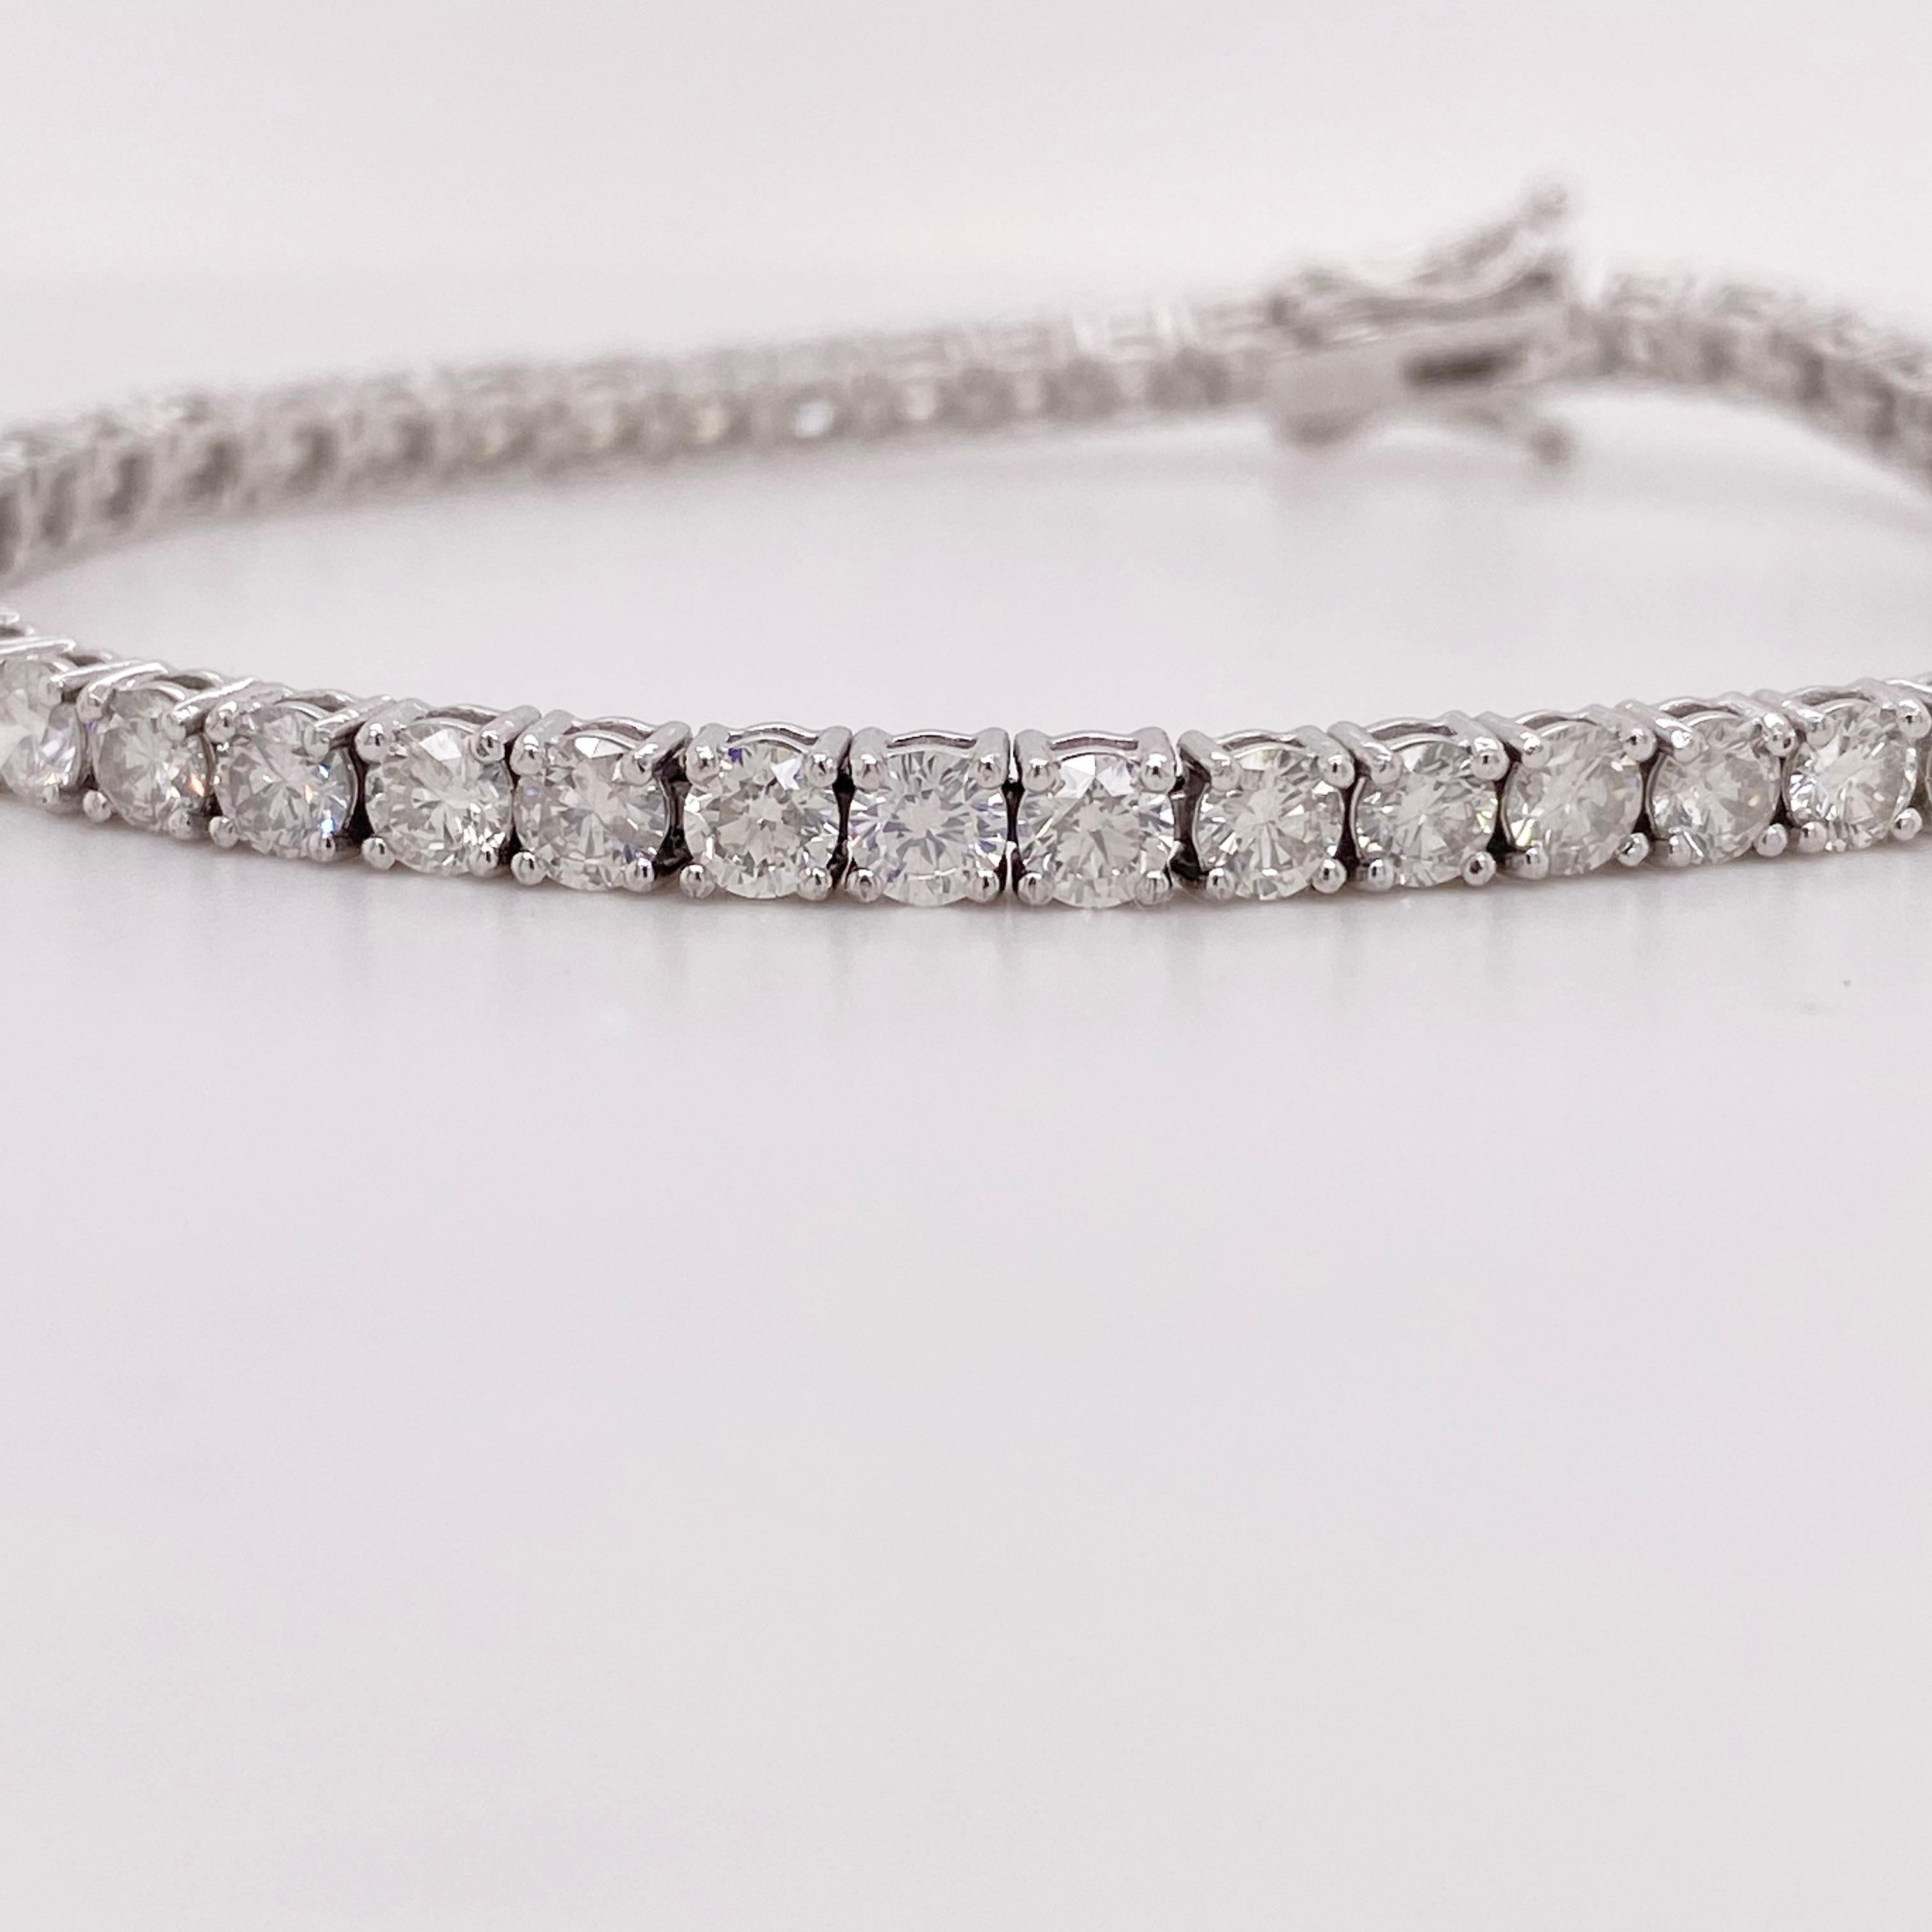 You know what they say, diamonds are a girls bestfriend. Luckily this 7.85 carat diamond tennis bracelet is your best friend for life. The stunning diamonds are set in 14 karat white gold, accompanied by a hidden clasp with a double safety latch.